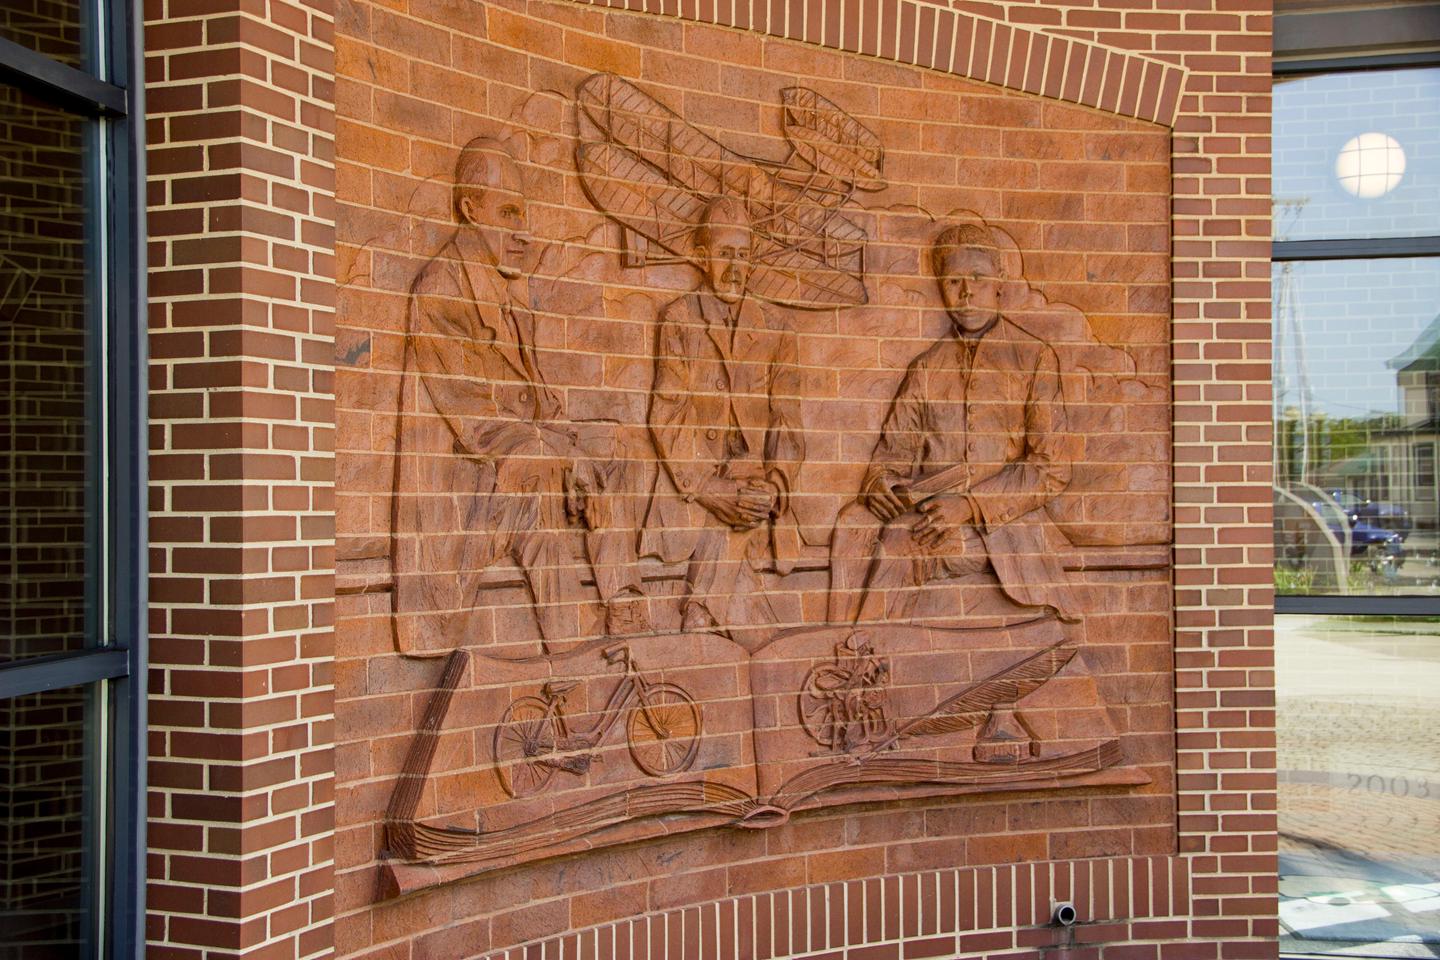 Wrights and Dunbar muralAn artistic mural etched out of the red brick wall at the Wright-Dunbar Interpretive Center entrance.